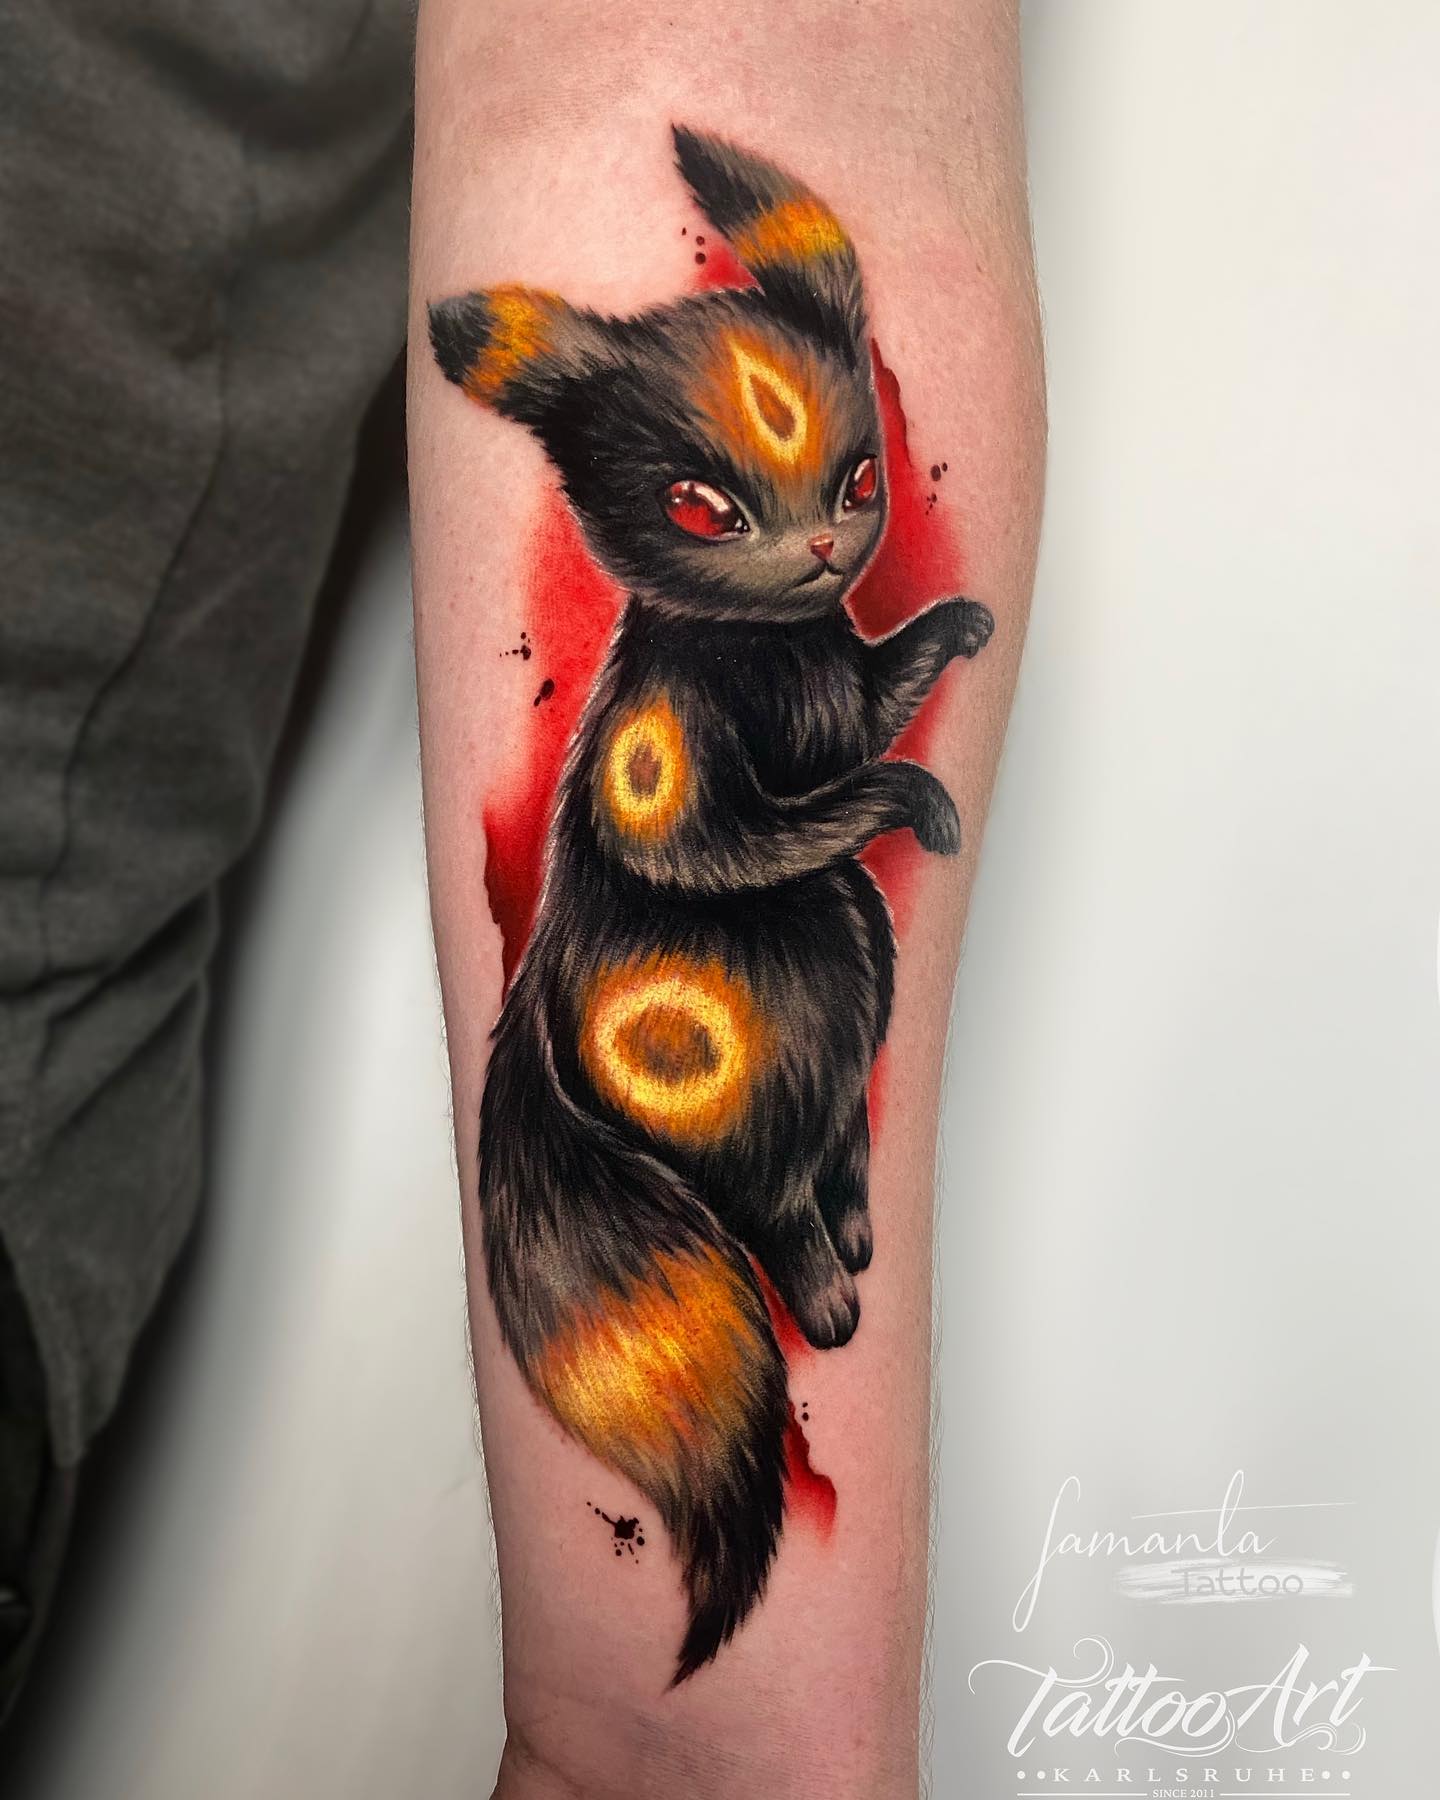 How about cats? Umbreon is based on a cat and he is the evolved form of Eevee, who is a Pokemon that can evolve into many forms depending on their primary stats. Let's get a tattoo of this classy cat.